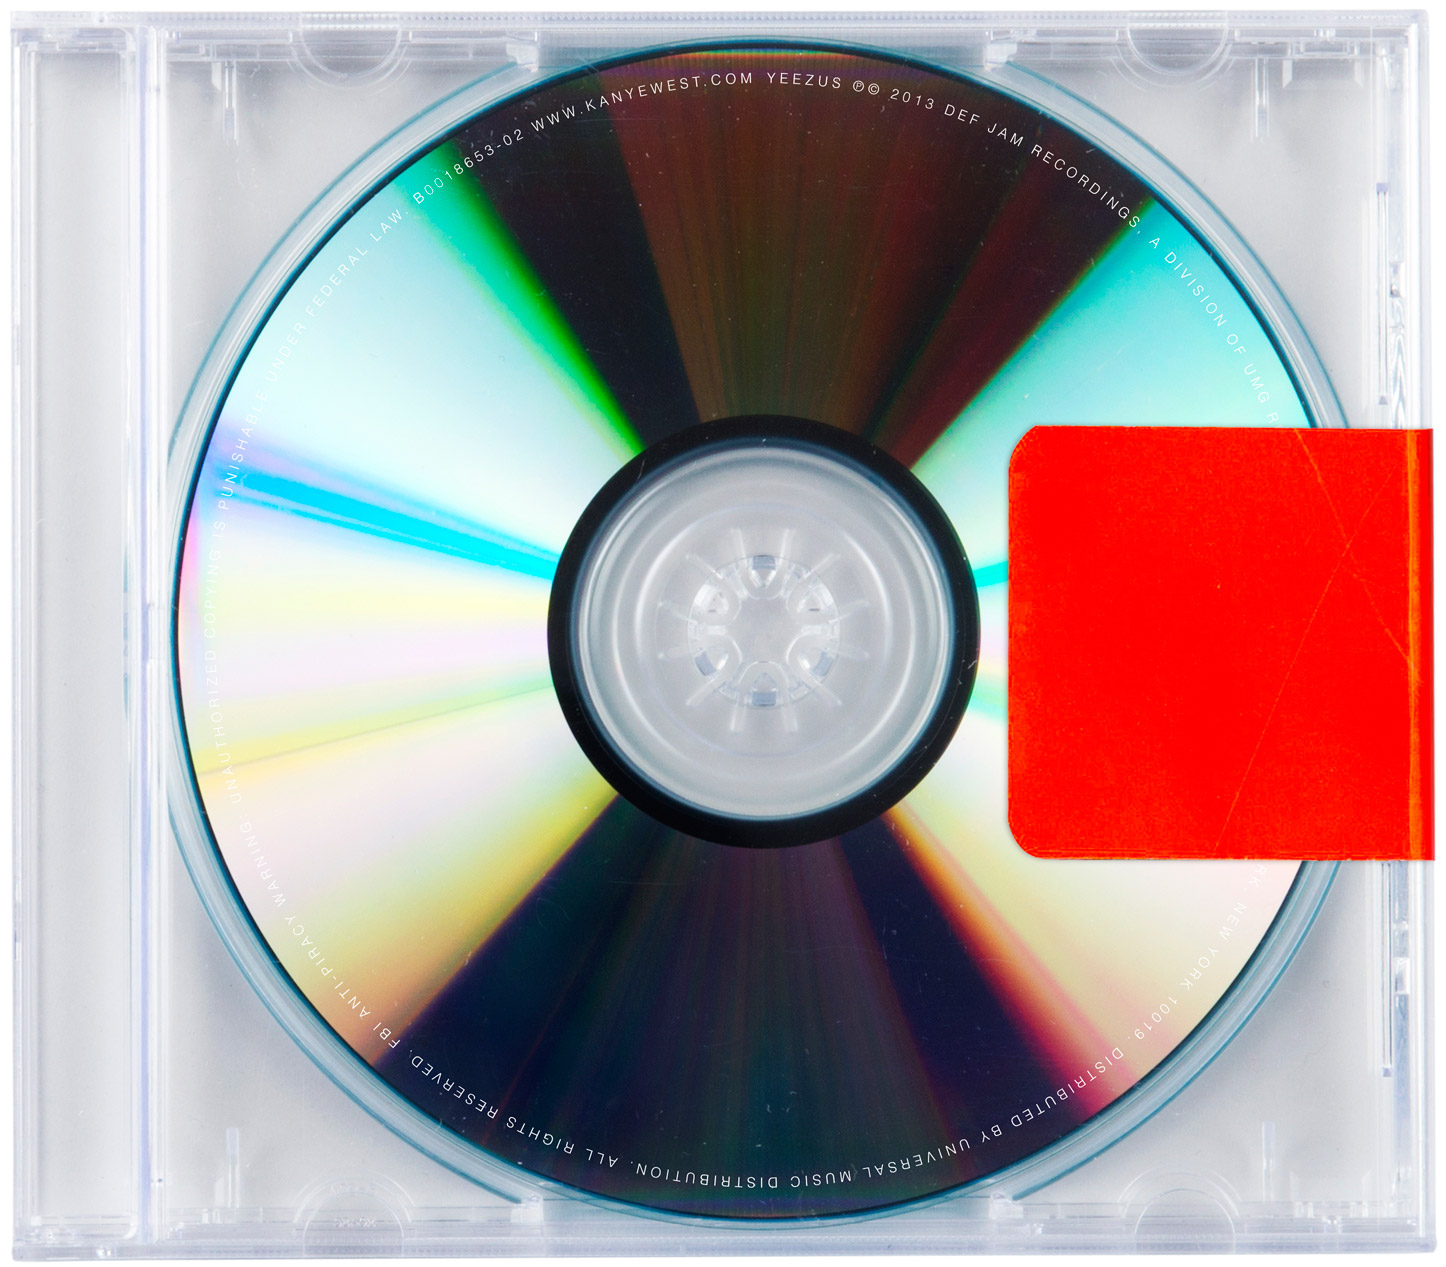 Kanye West – Yeezus (Track List & Production Credits) | HipHop-N-More1446 x 1267